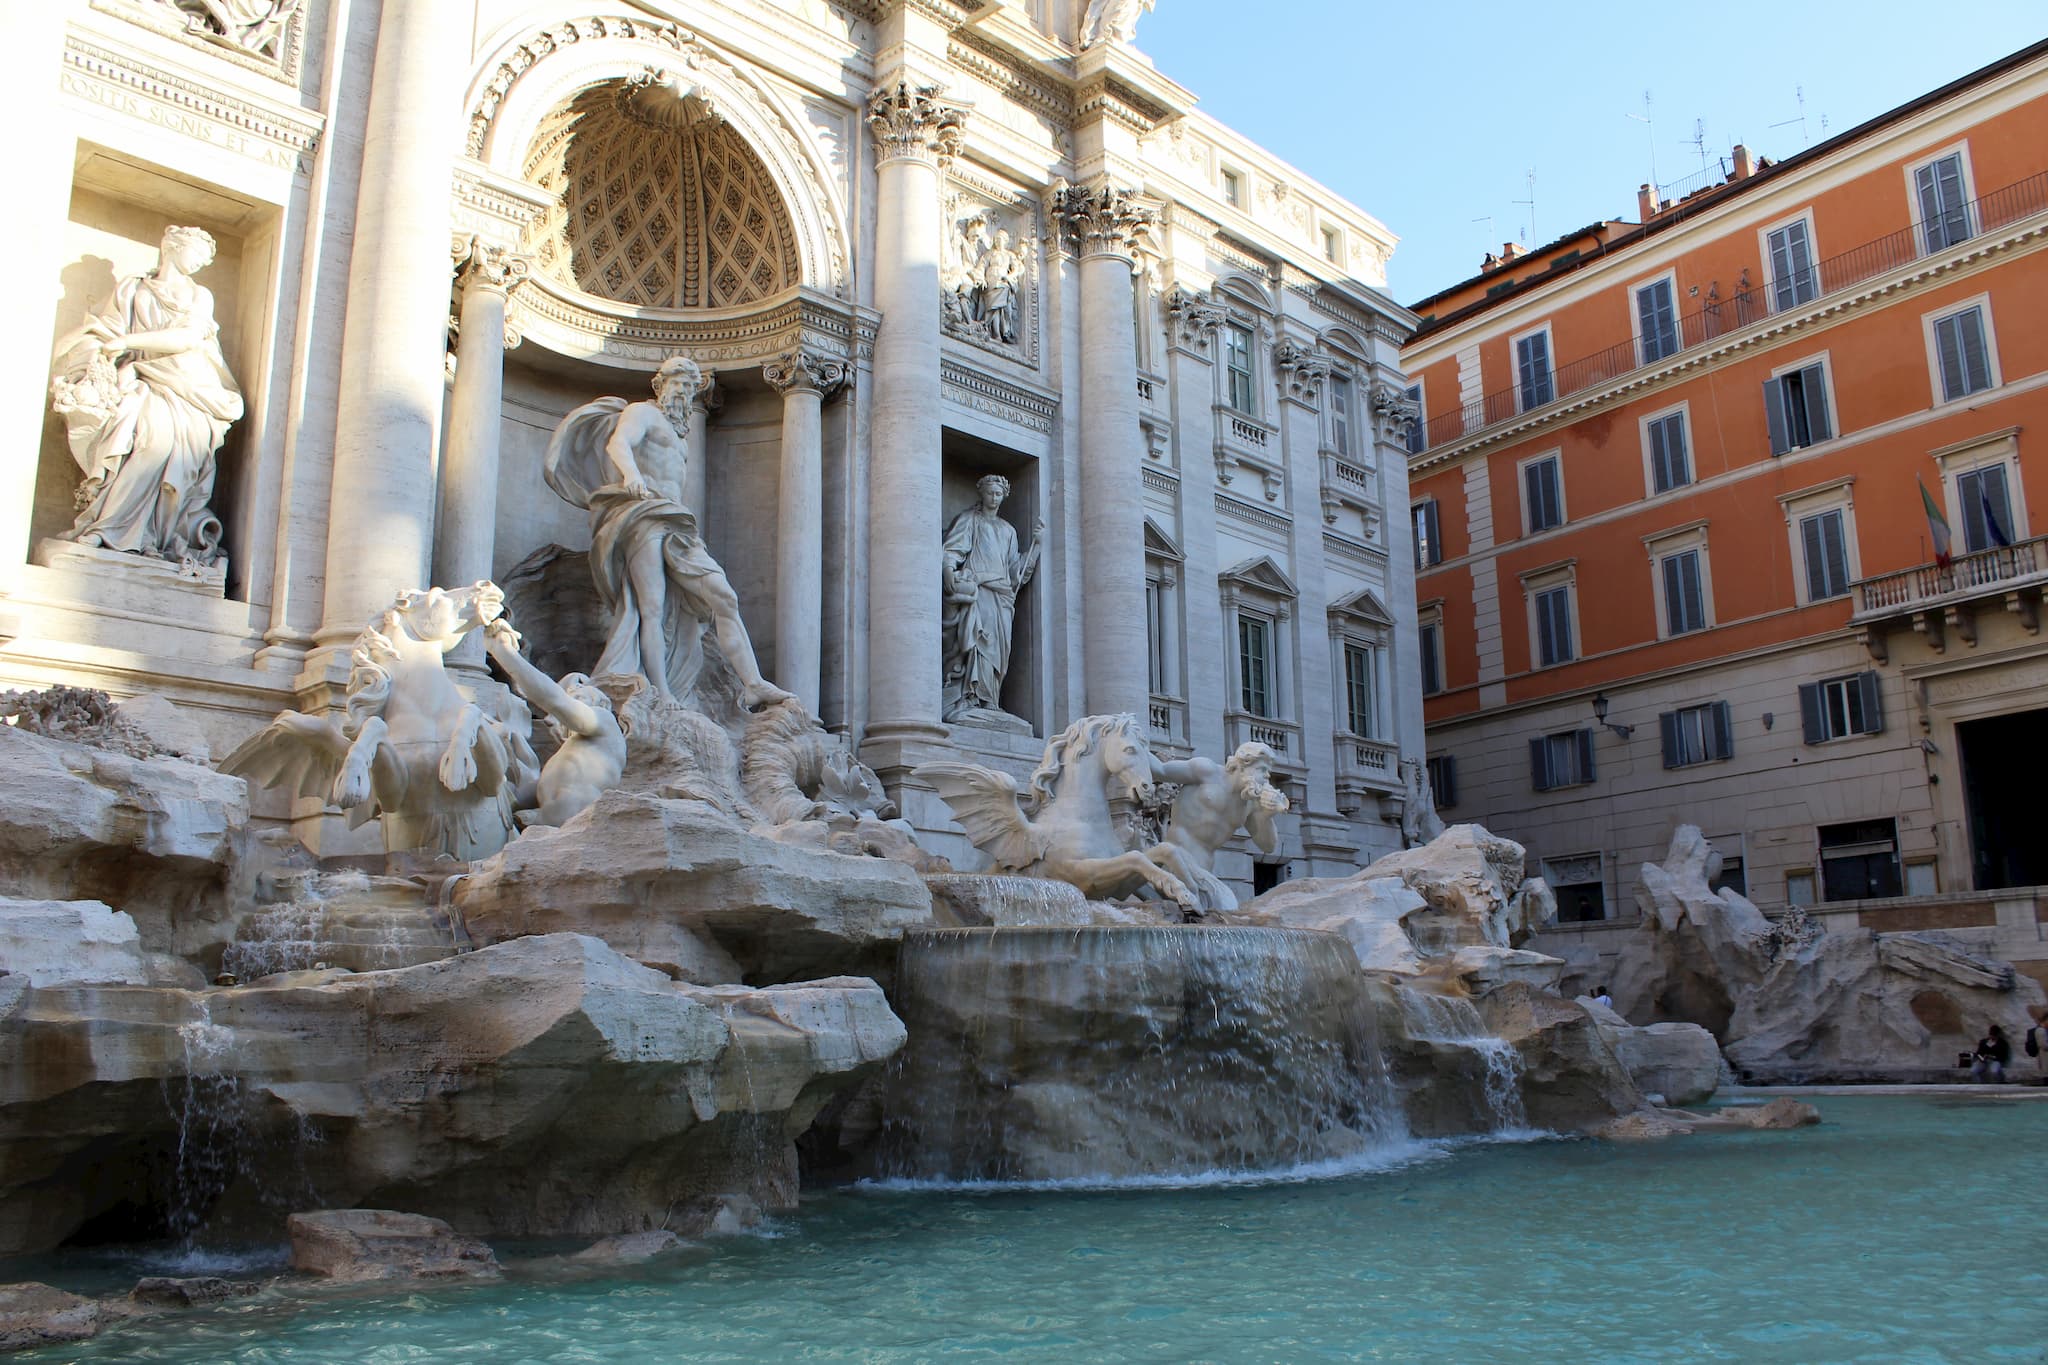 Ornate marble carvings of the Trevi Fountain.